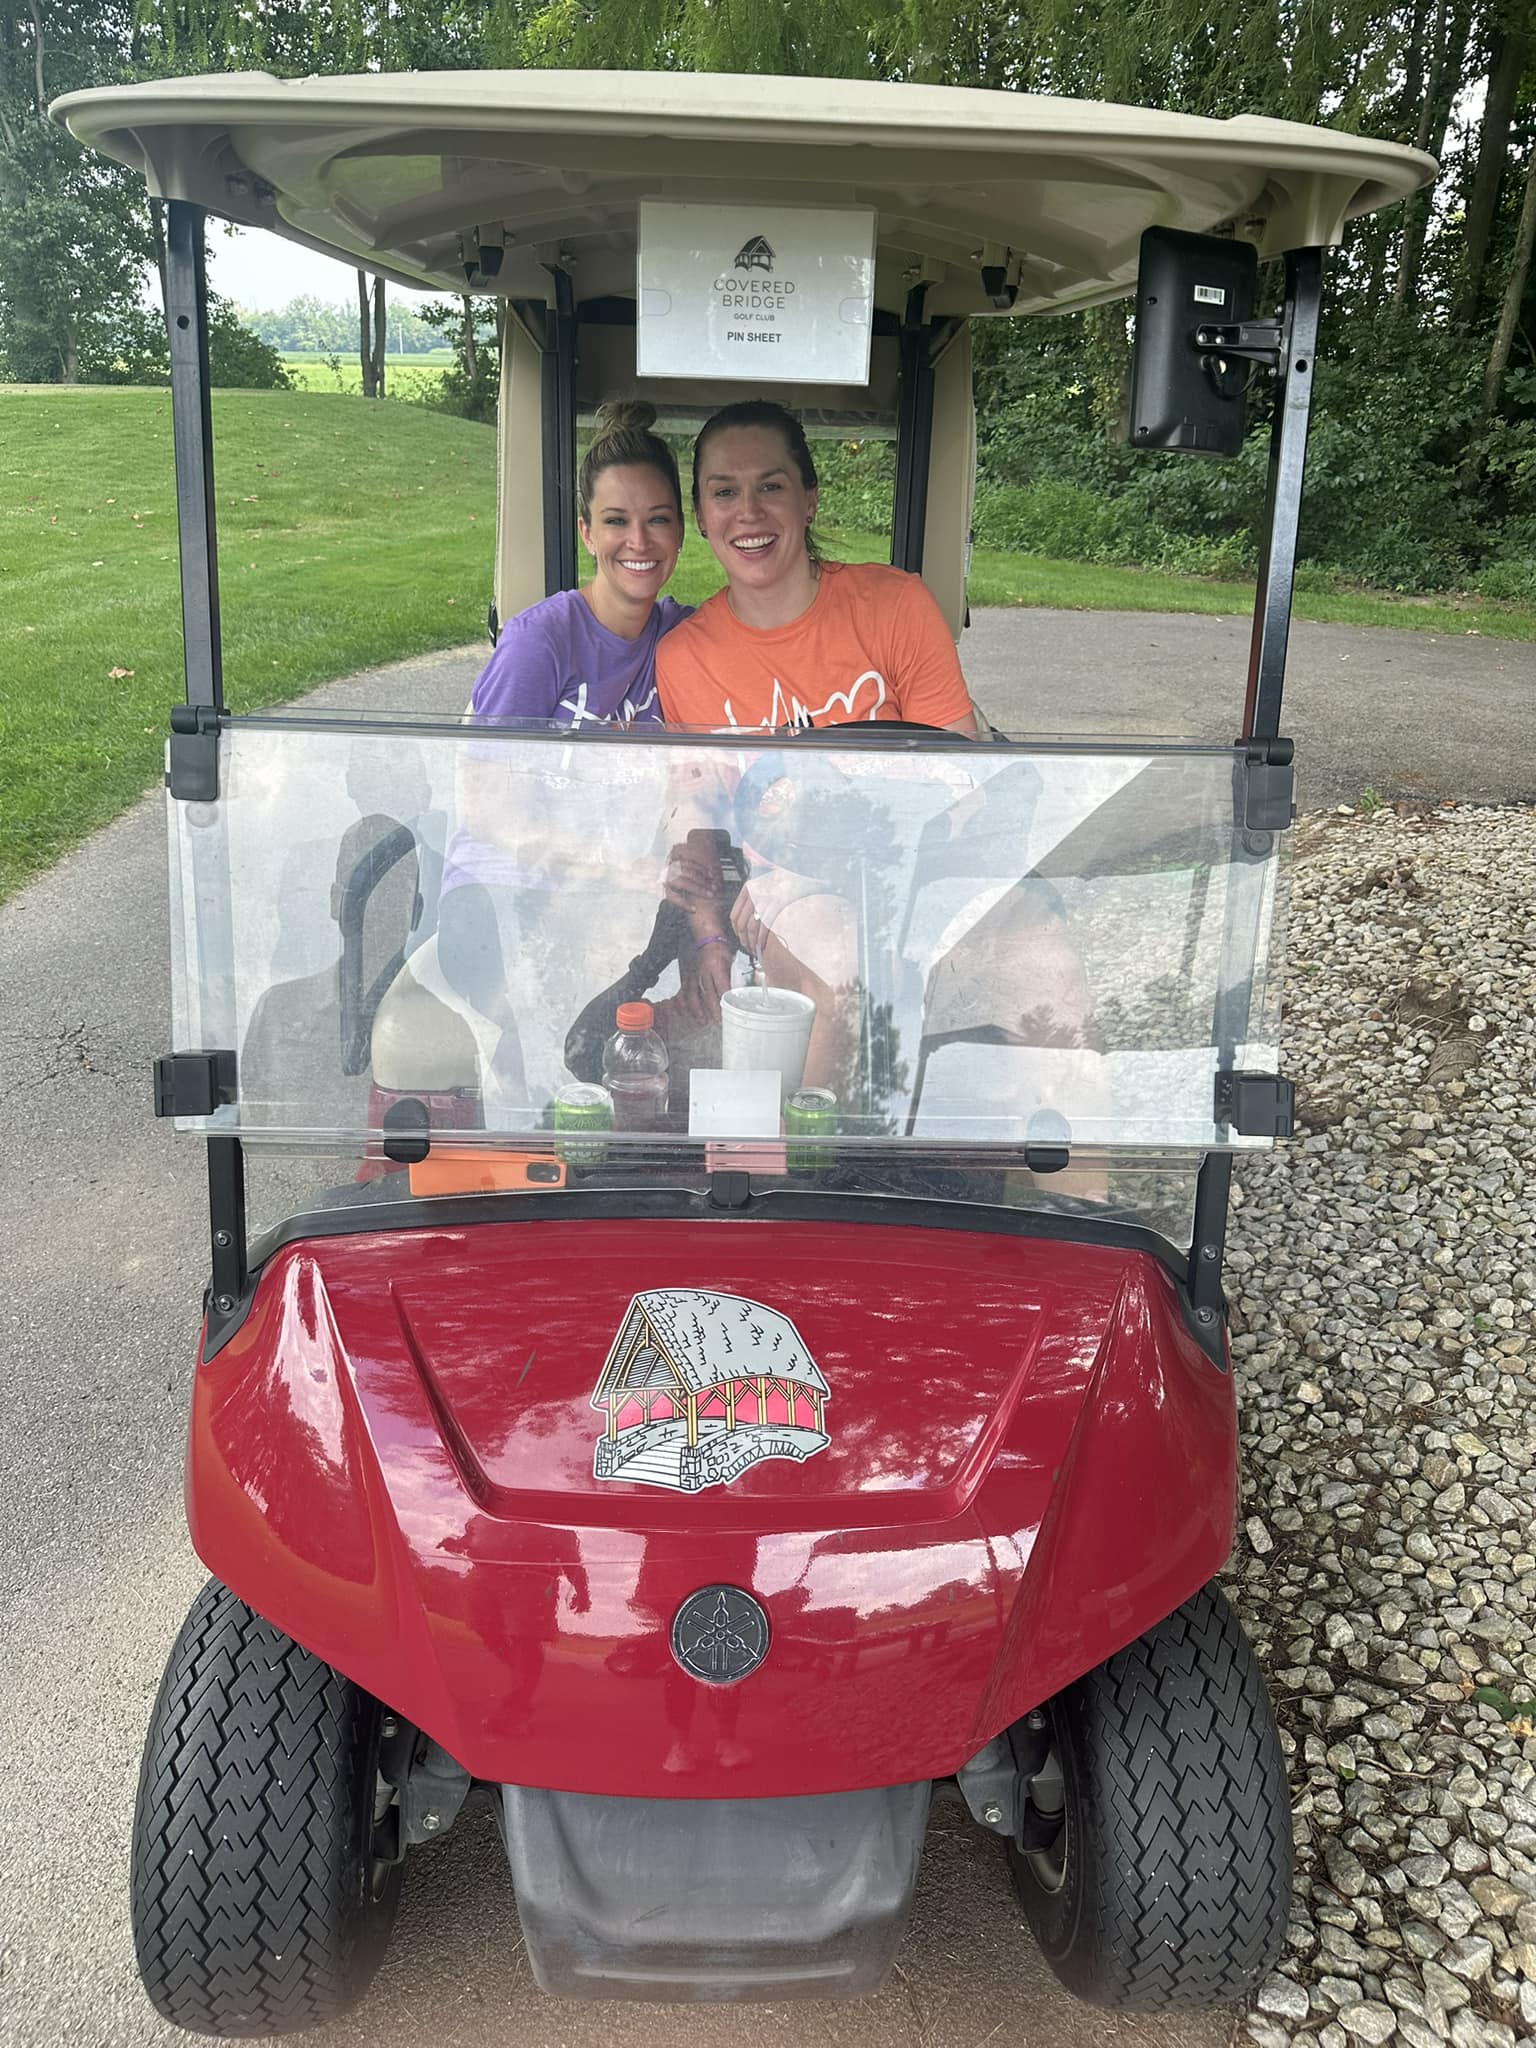 Golfers sitting in a golf cart smiling at the camera.